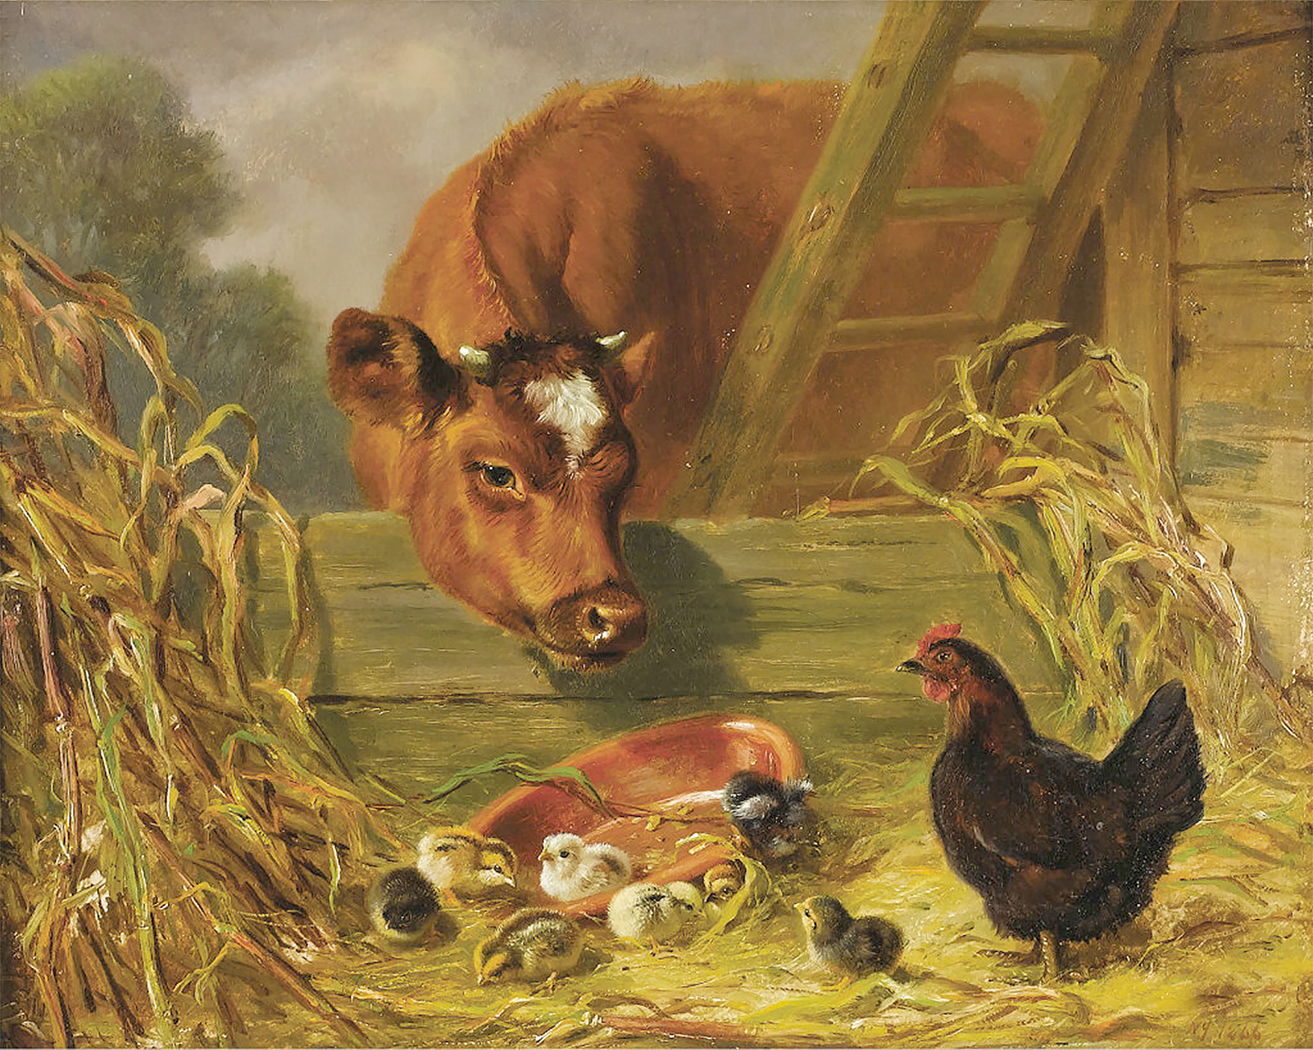 Farm/Pastoral Farm Cow with Chicks Framed Oil Painting Print on Canvas